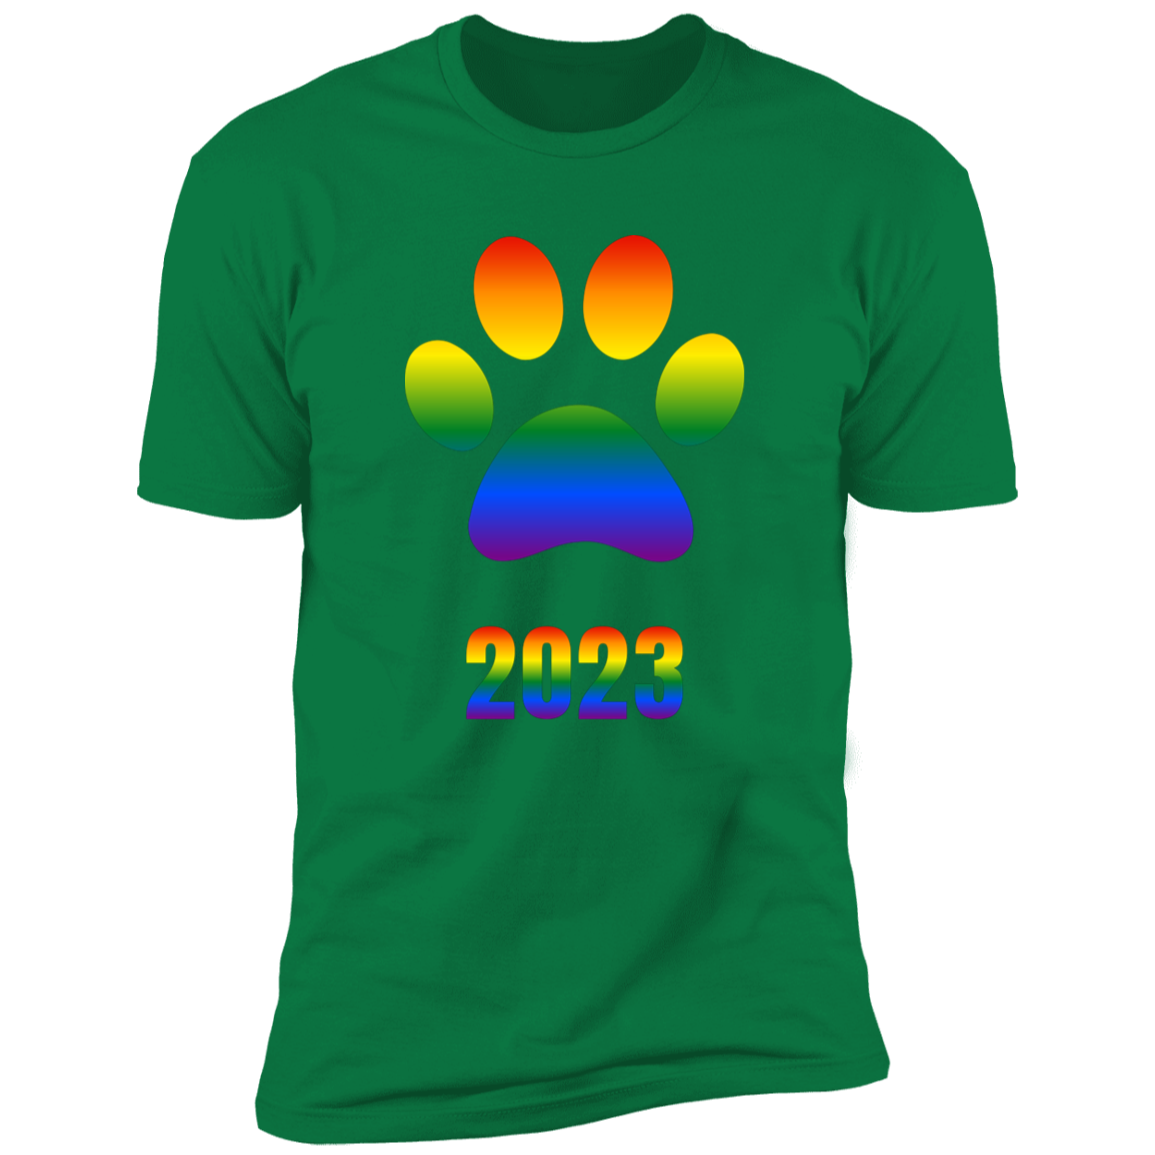 Dog Paw pride 2023 t-shirt, dog pride dog shirt for humans, in kelly green